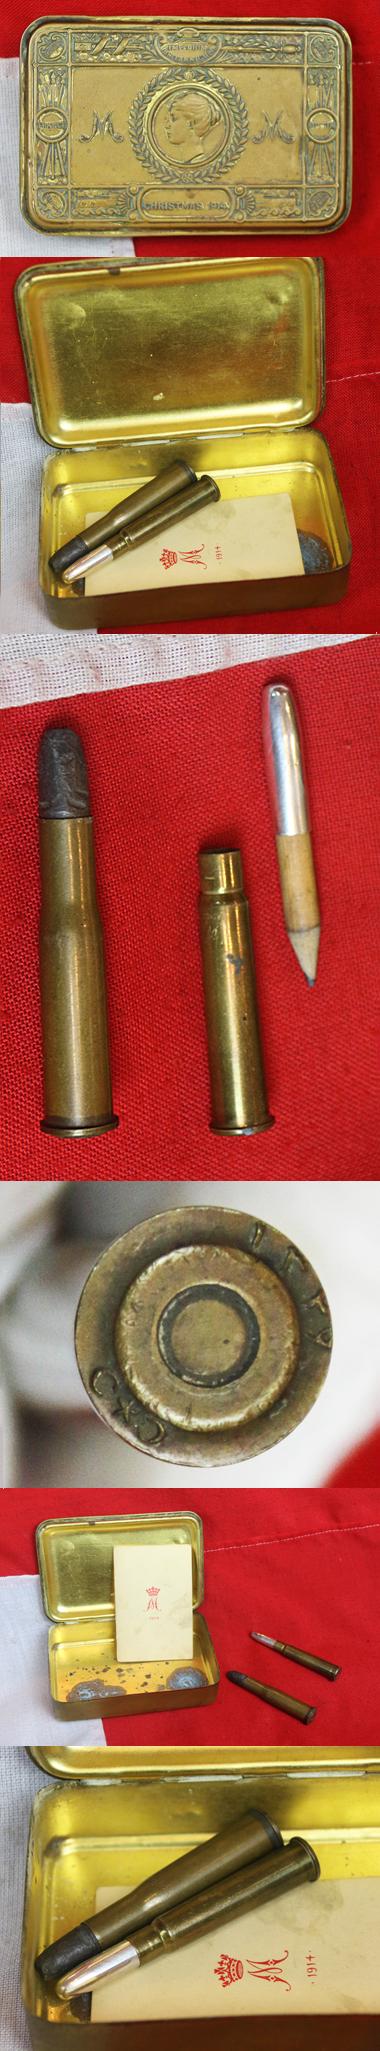 An Officer Issue Princess Mary Christmas Box, With Officer's Silver Pencil, in Bullet Form, with Princes Mary Card & Gallipoli Souvenir Turkish Rifle Bullet